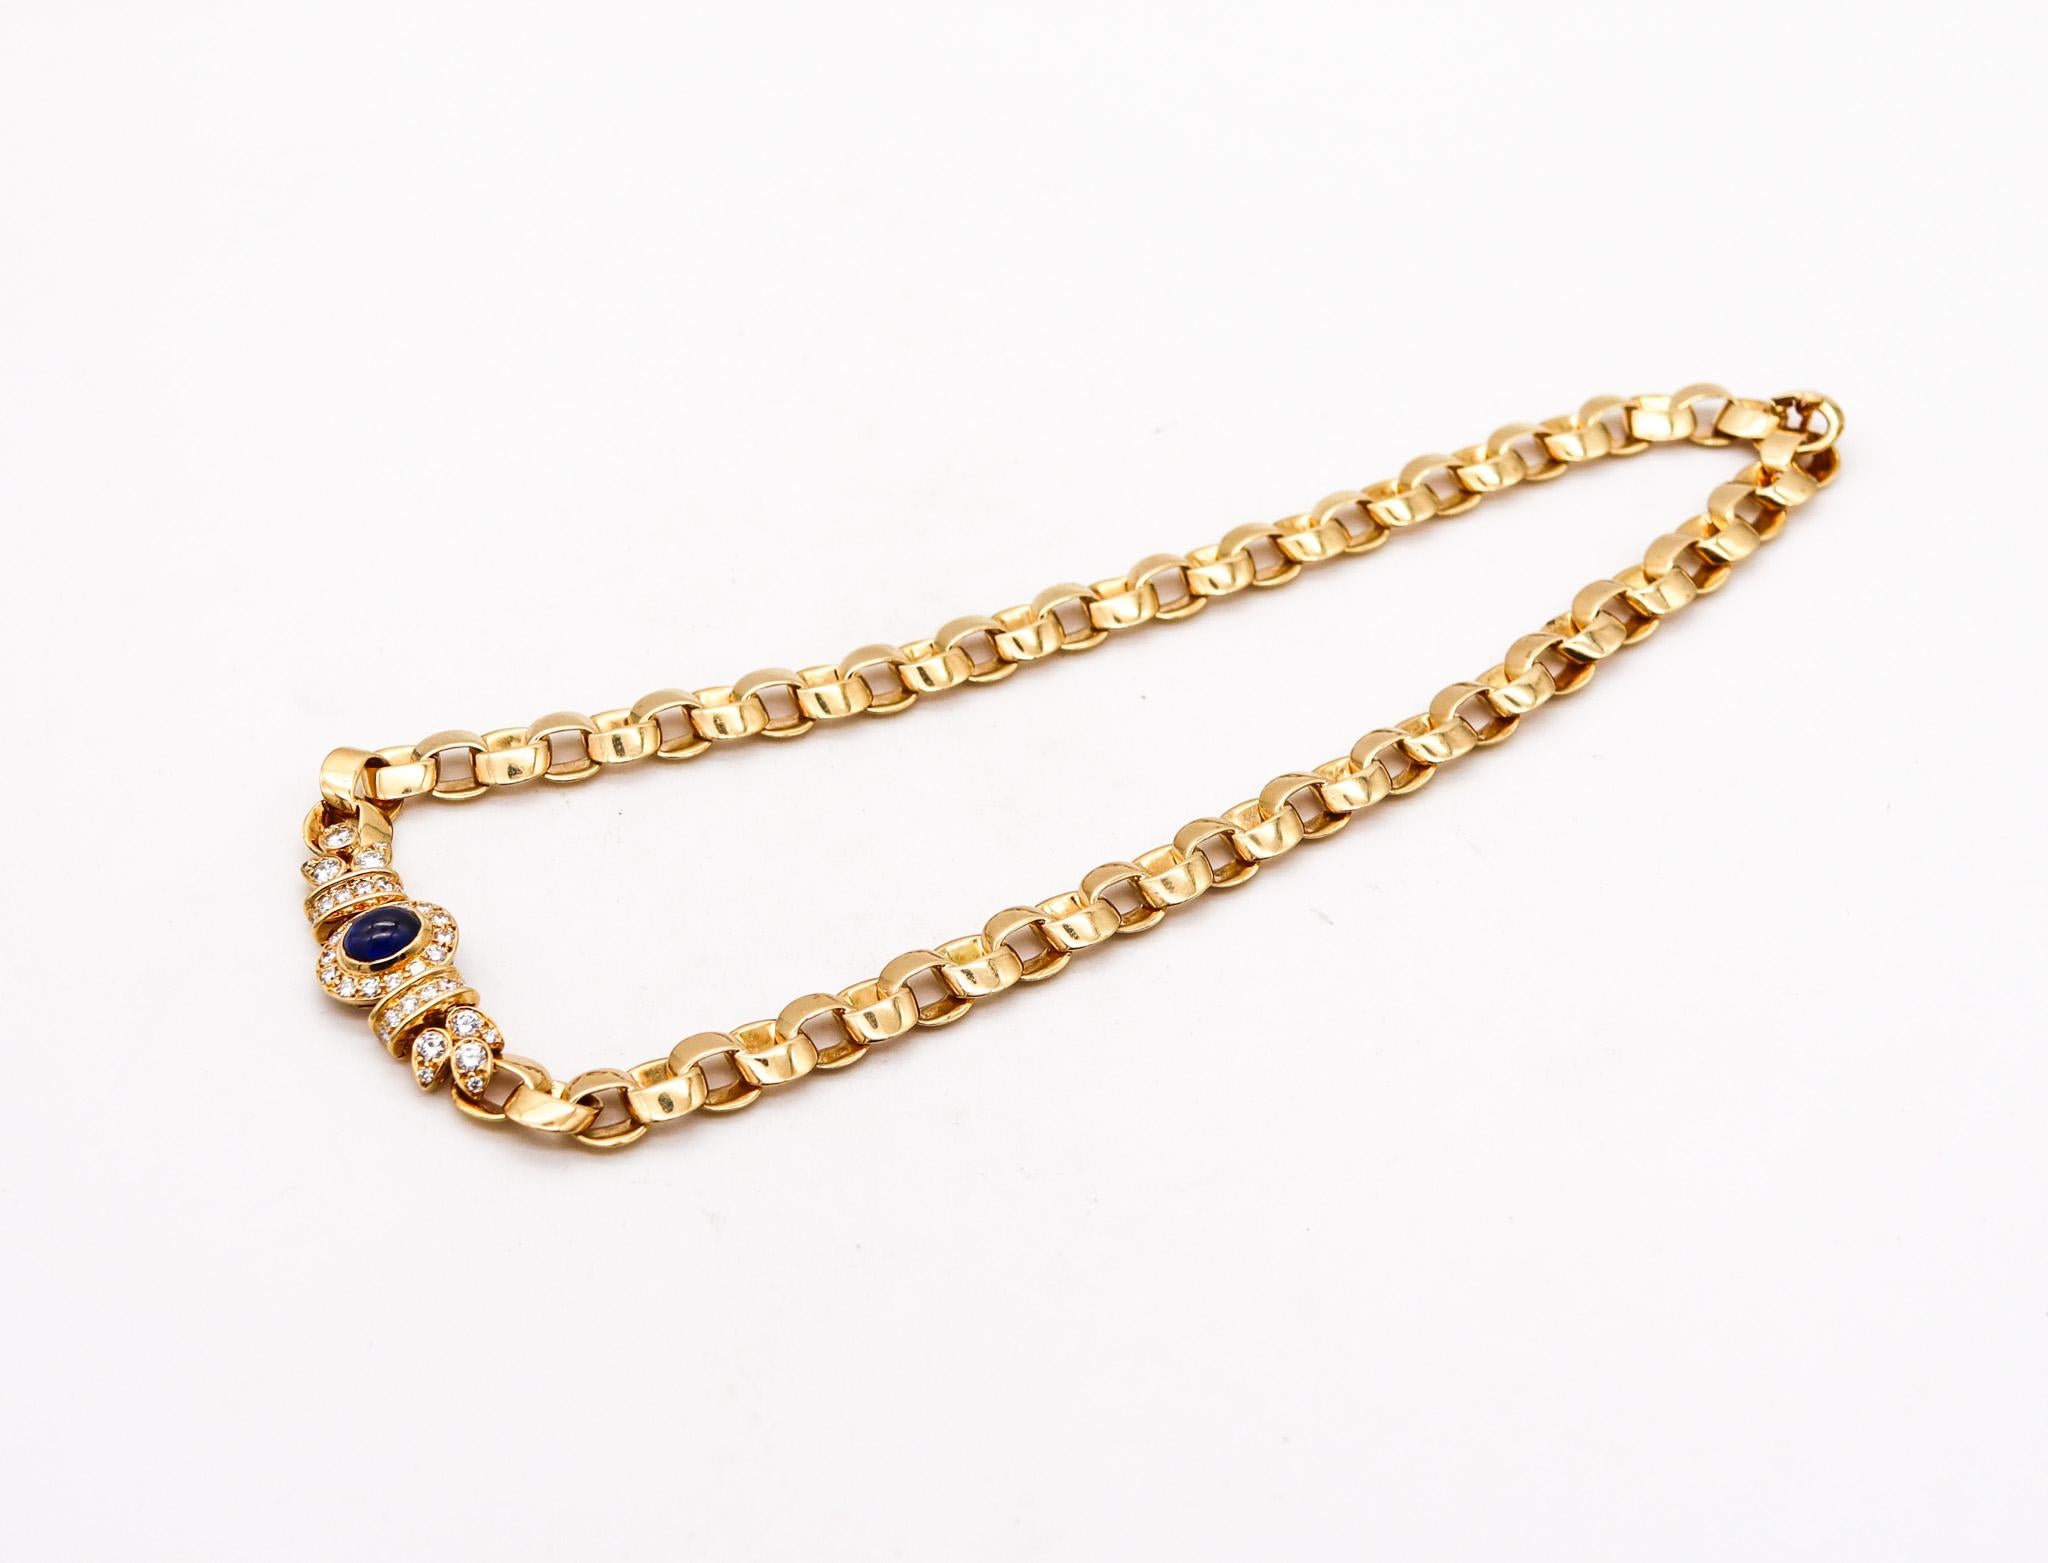 Van Cleef & Arpels Paris Necklace In 18Kt Gold With 3.63 Ctw Diamonds & Sapphire In Excellent Condition For Sale In Miami, FL